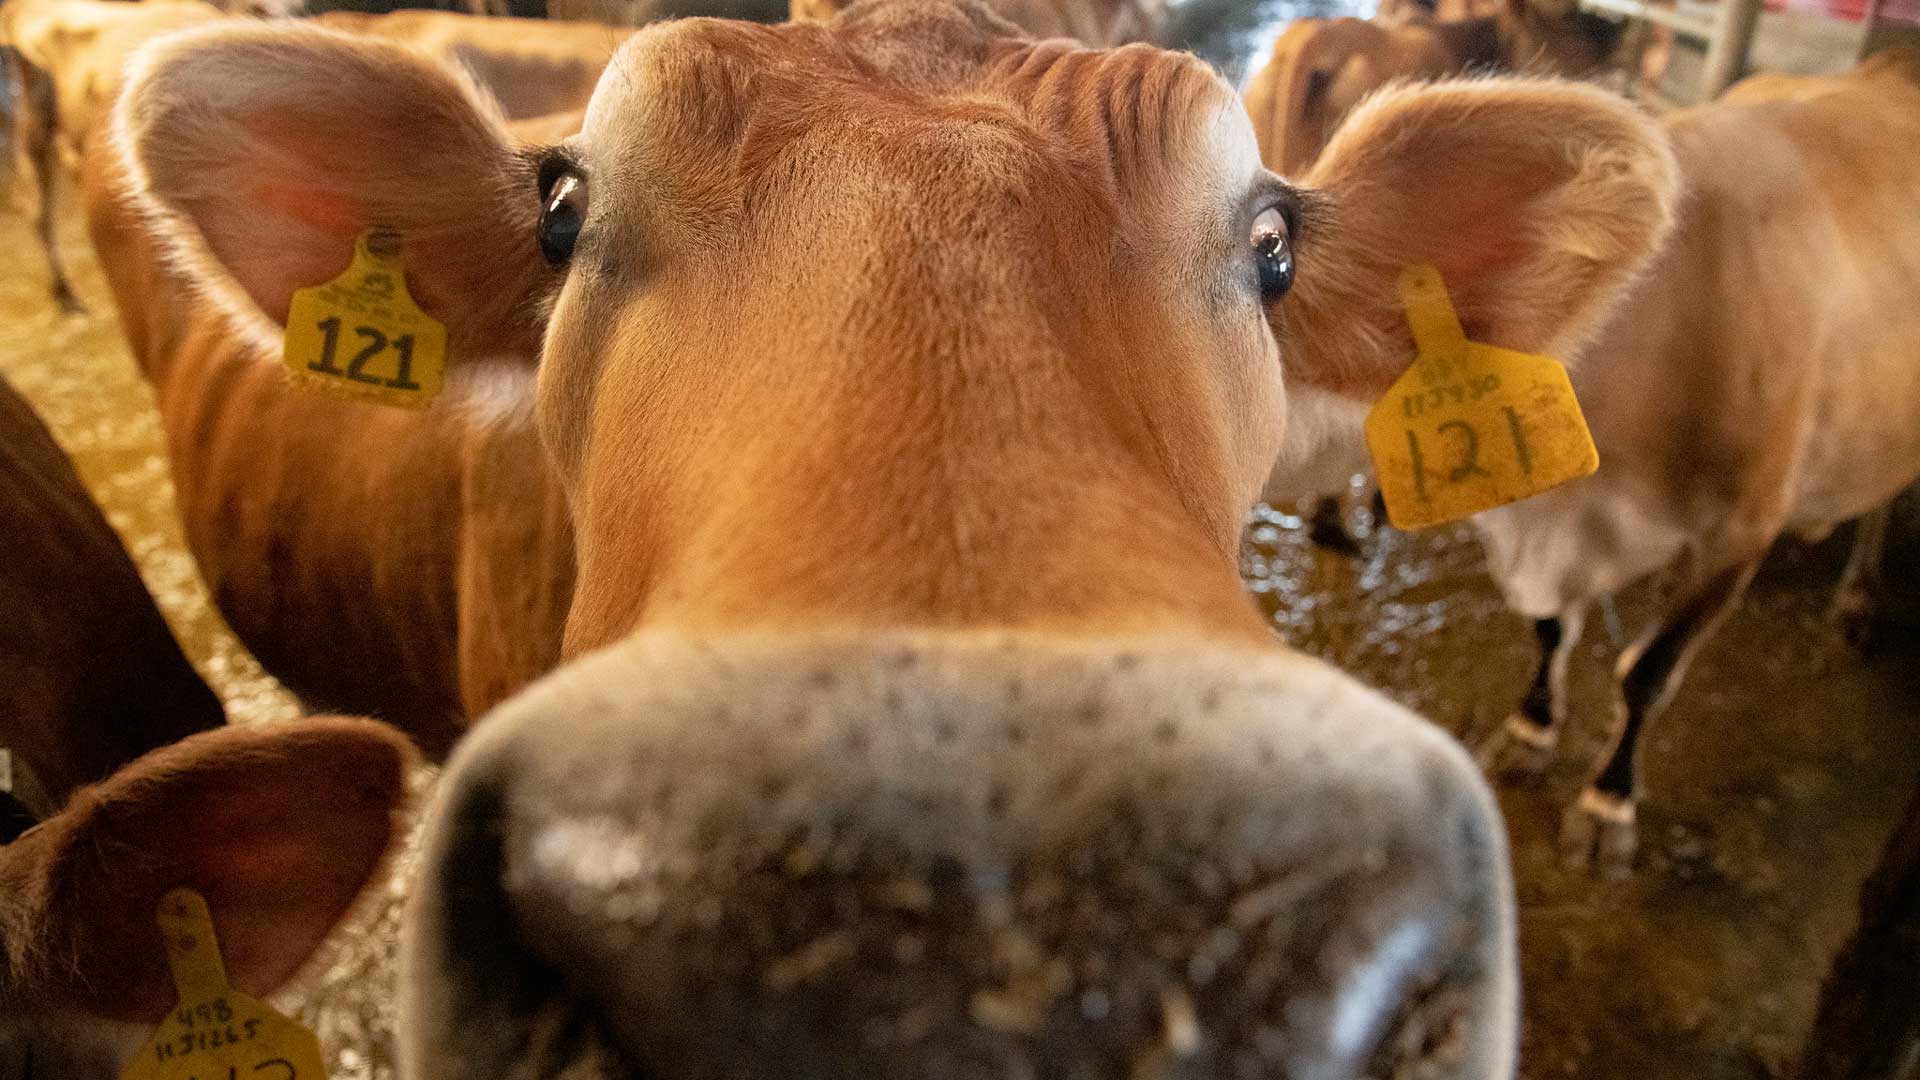 Jersey dairy cows pictured in a milking parlor. 